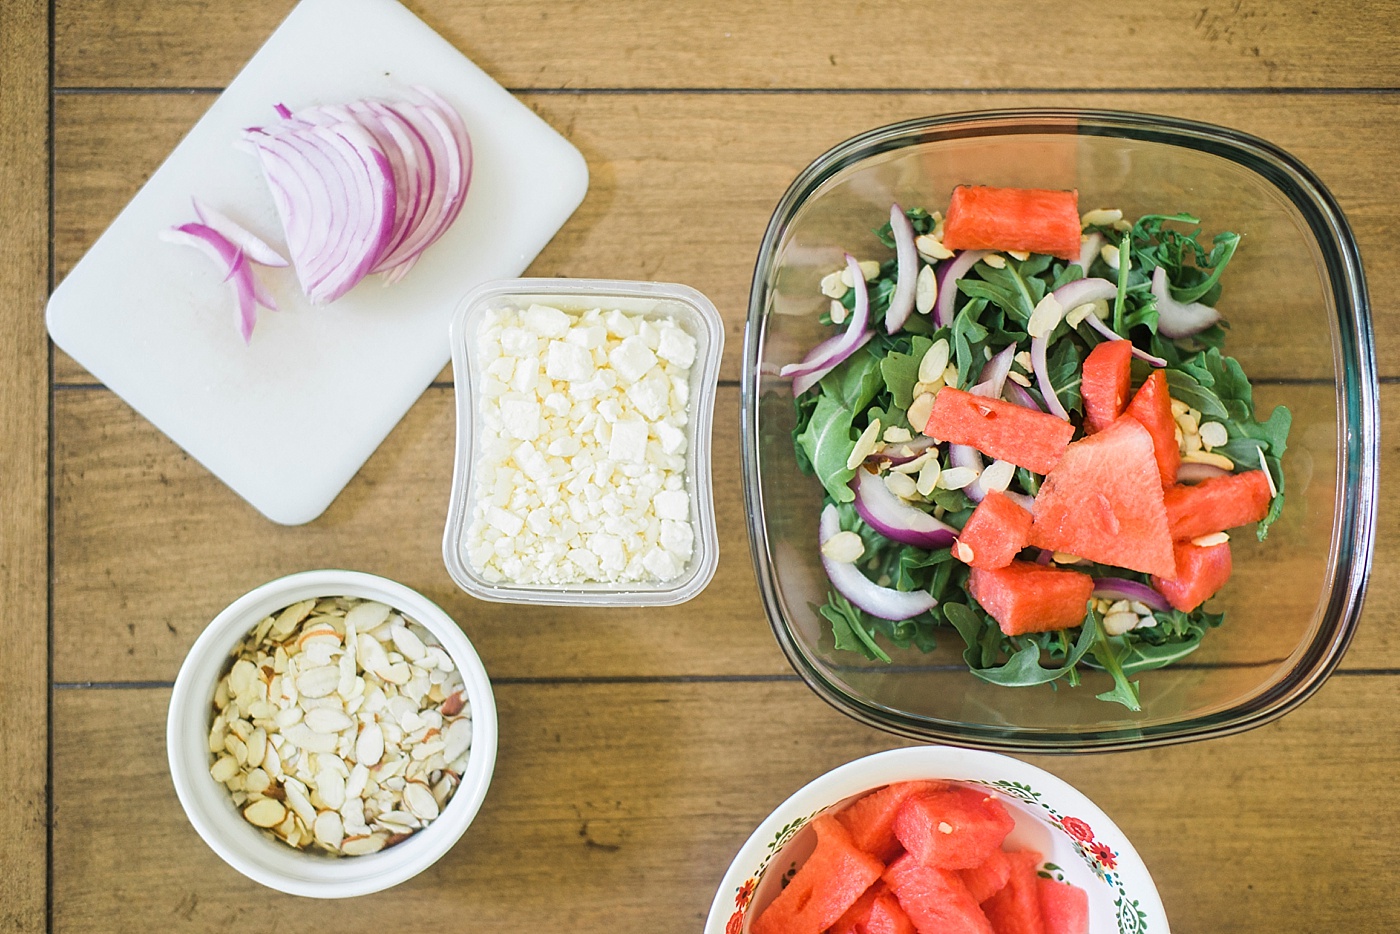 Health Hack: Be Healthy and Save Time prepping and planning meals with PrepDish